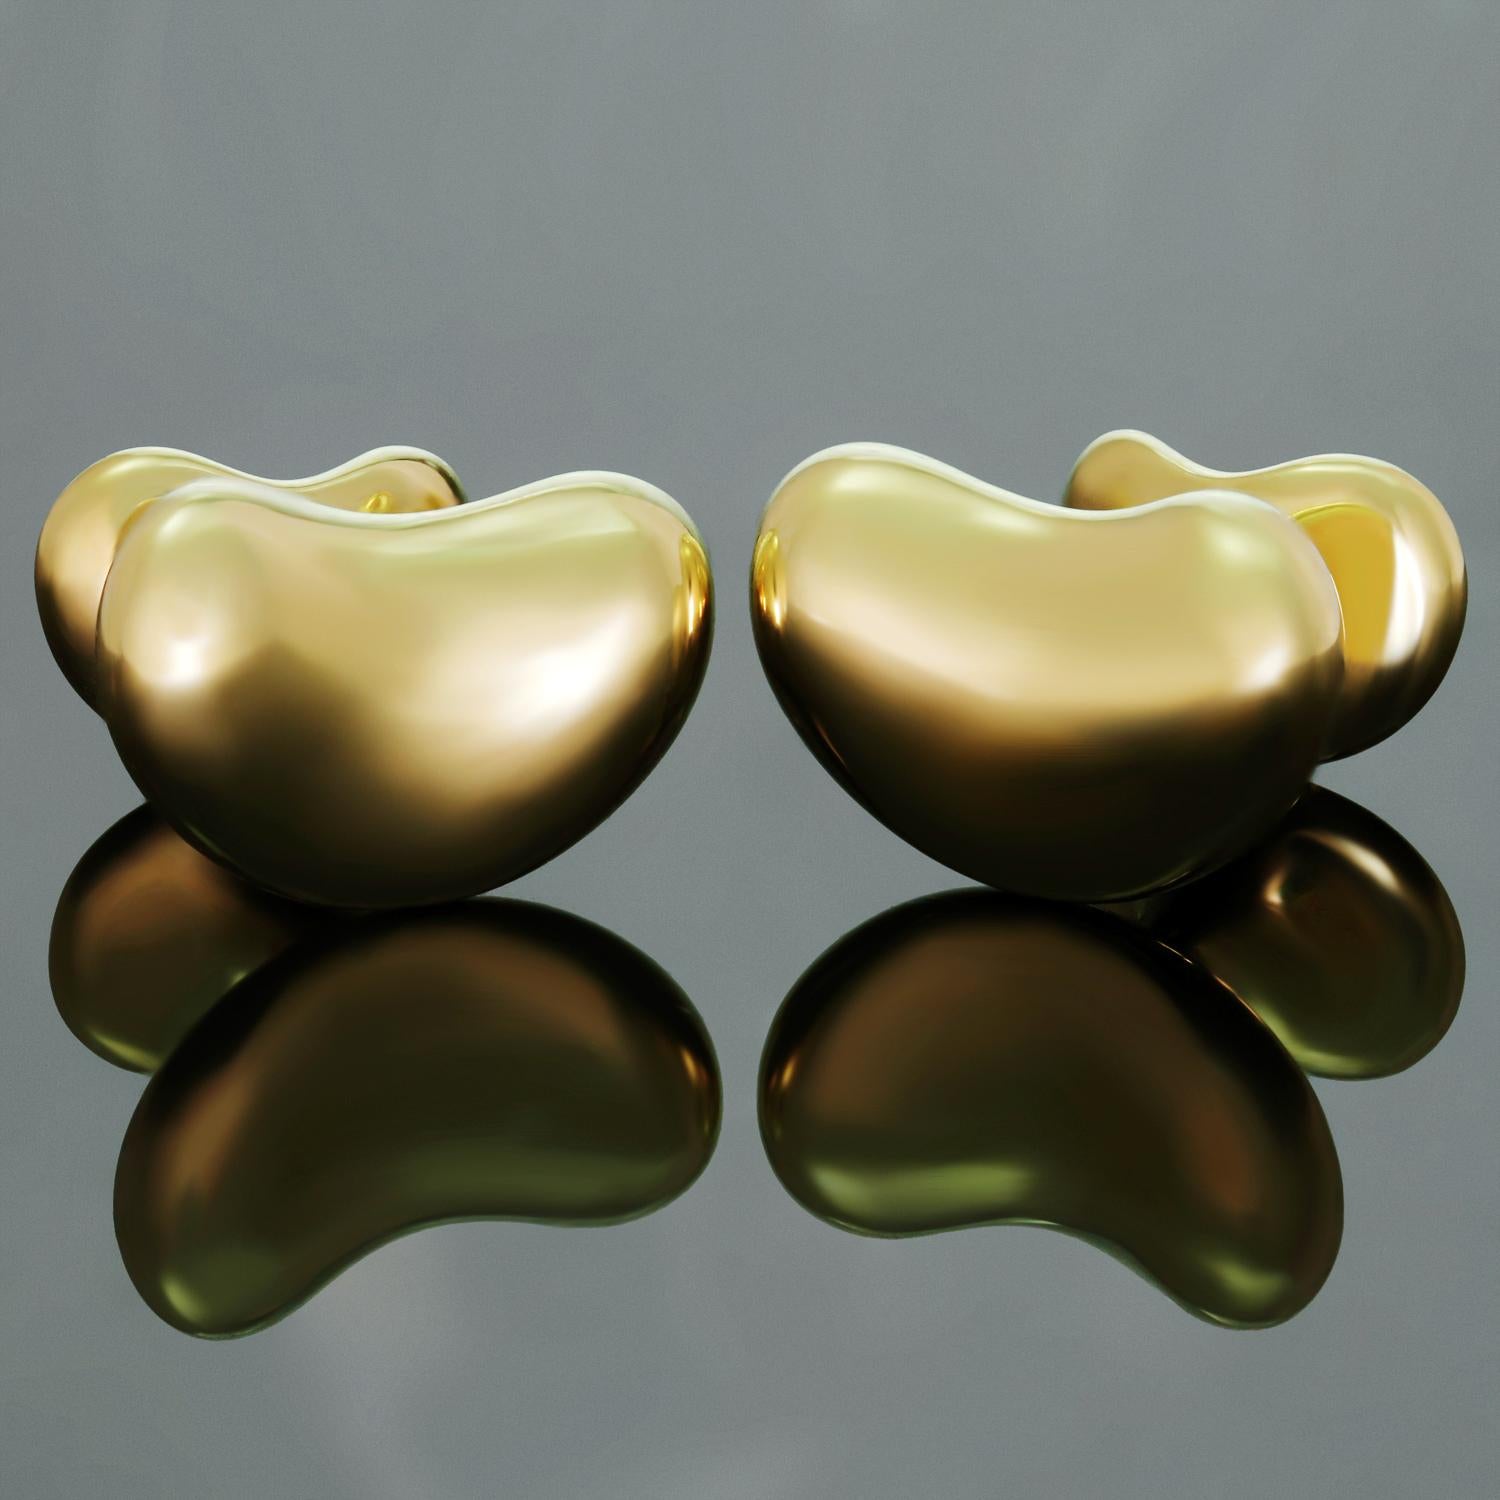 These iconic cufflinks by Tiffany & Co. feature Elsa Peretti's classic bean design crafted in 18k yellow gold. Made in Spain circa 2010s. Measurements: 0.70